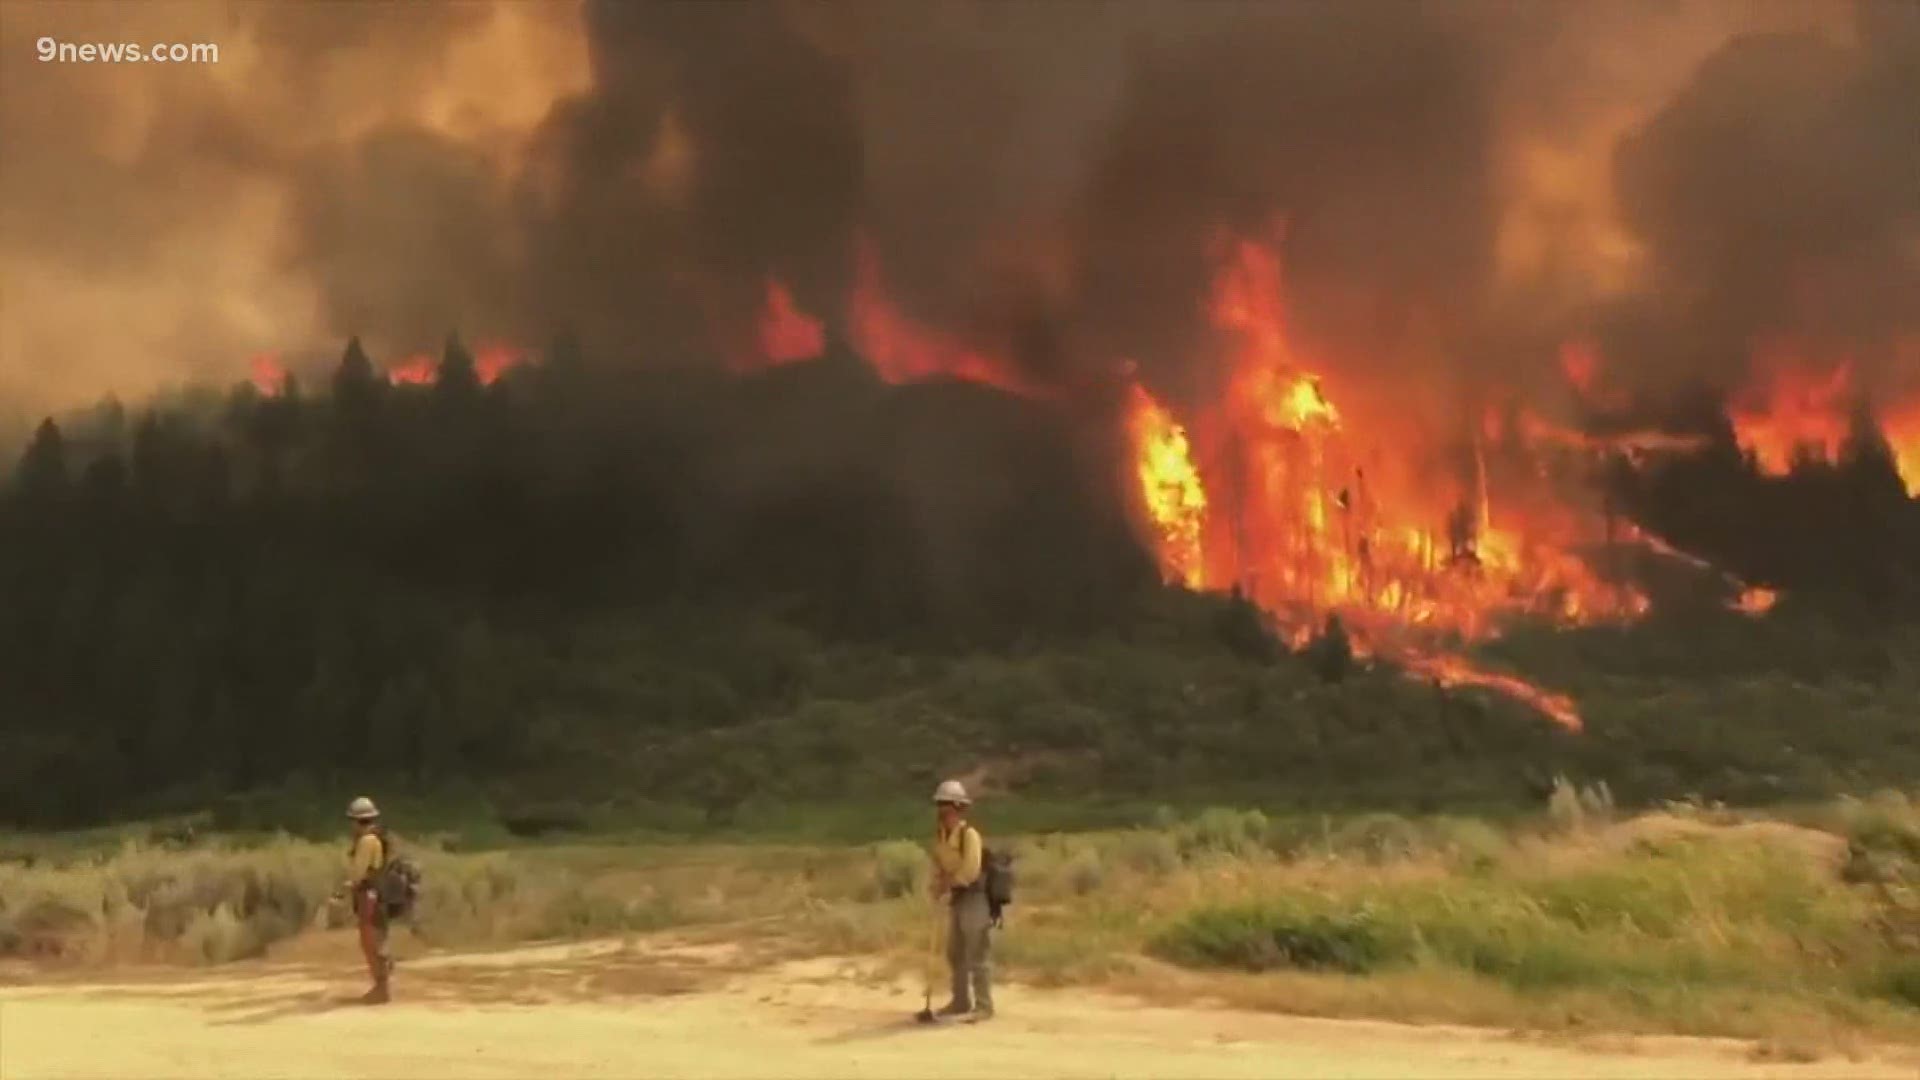 Governor Polis said Tuesday 3 of the 4 big wildfires were likely caused by humans.